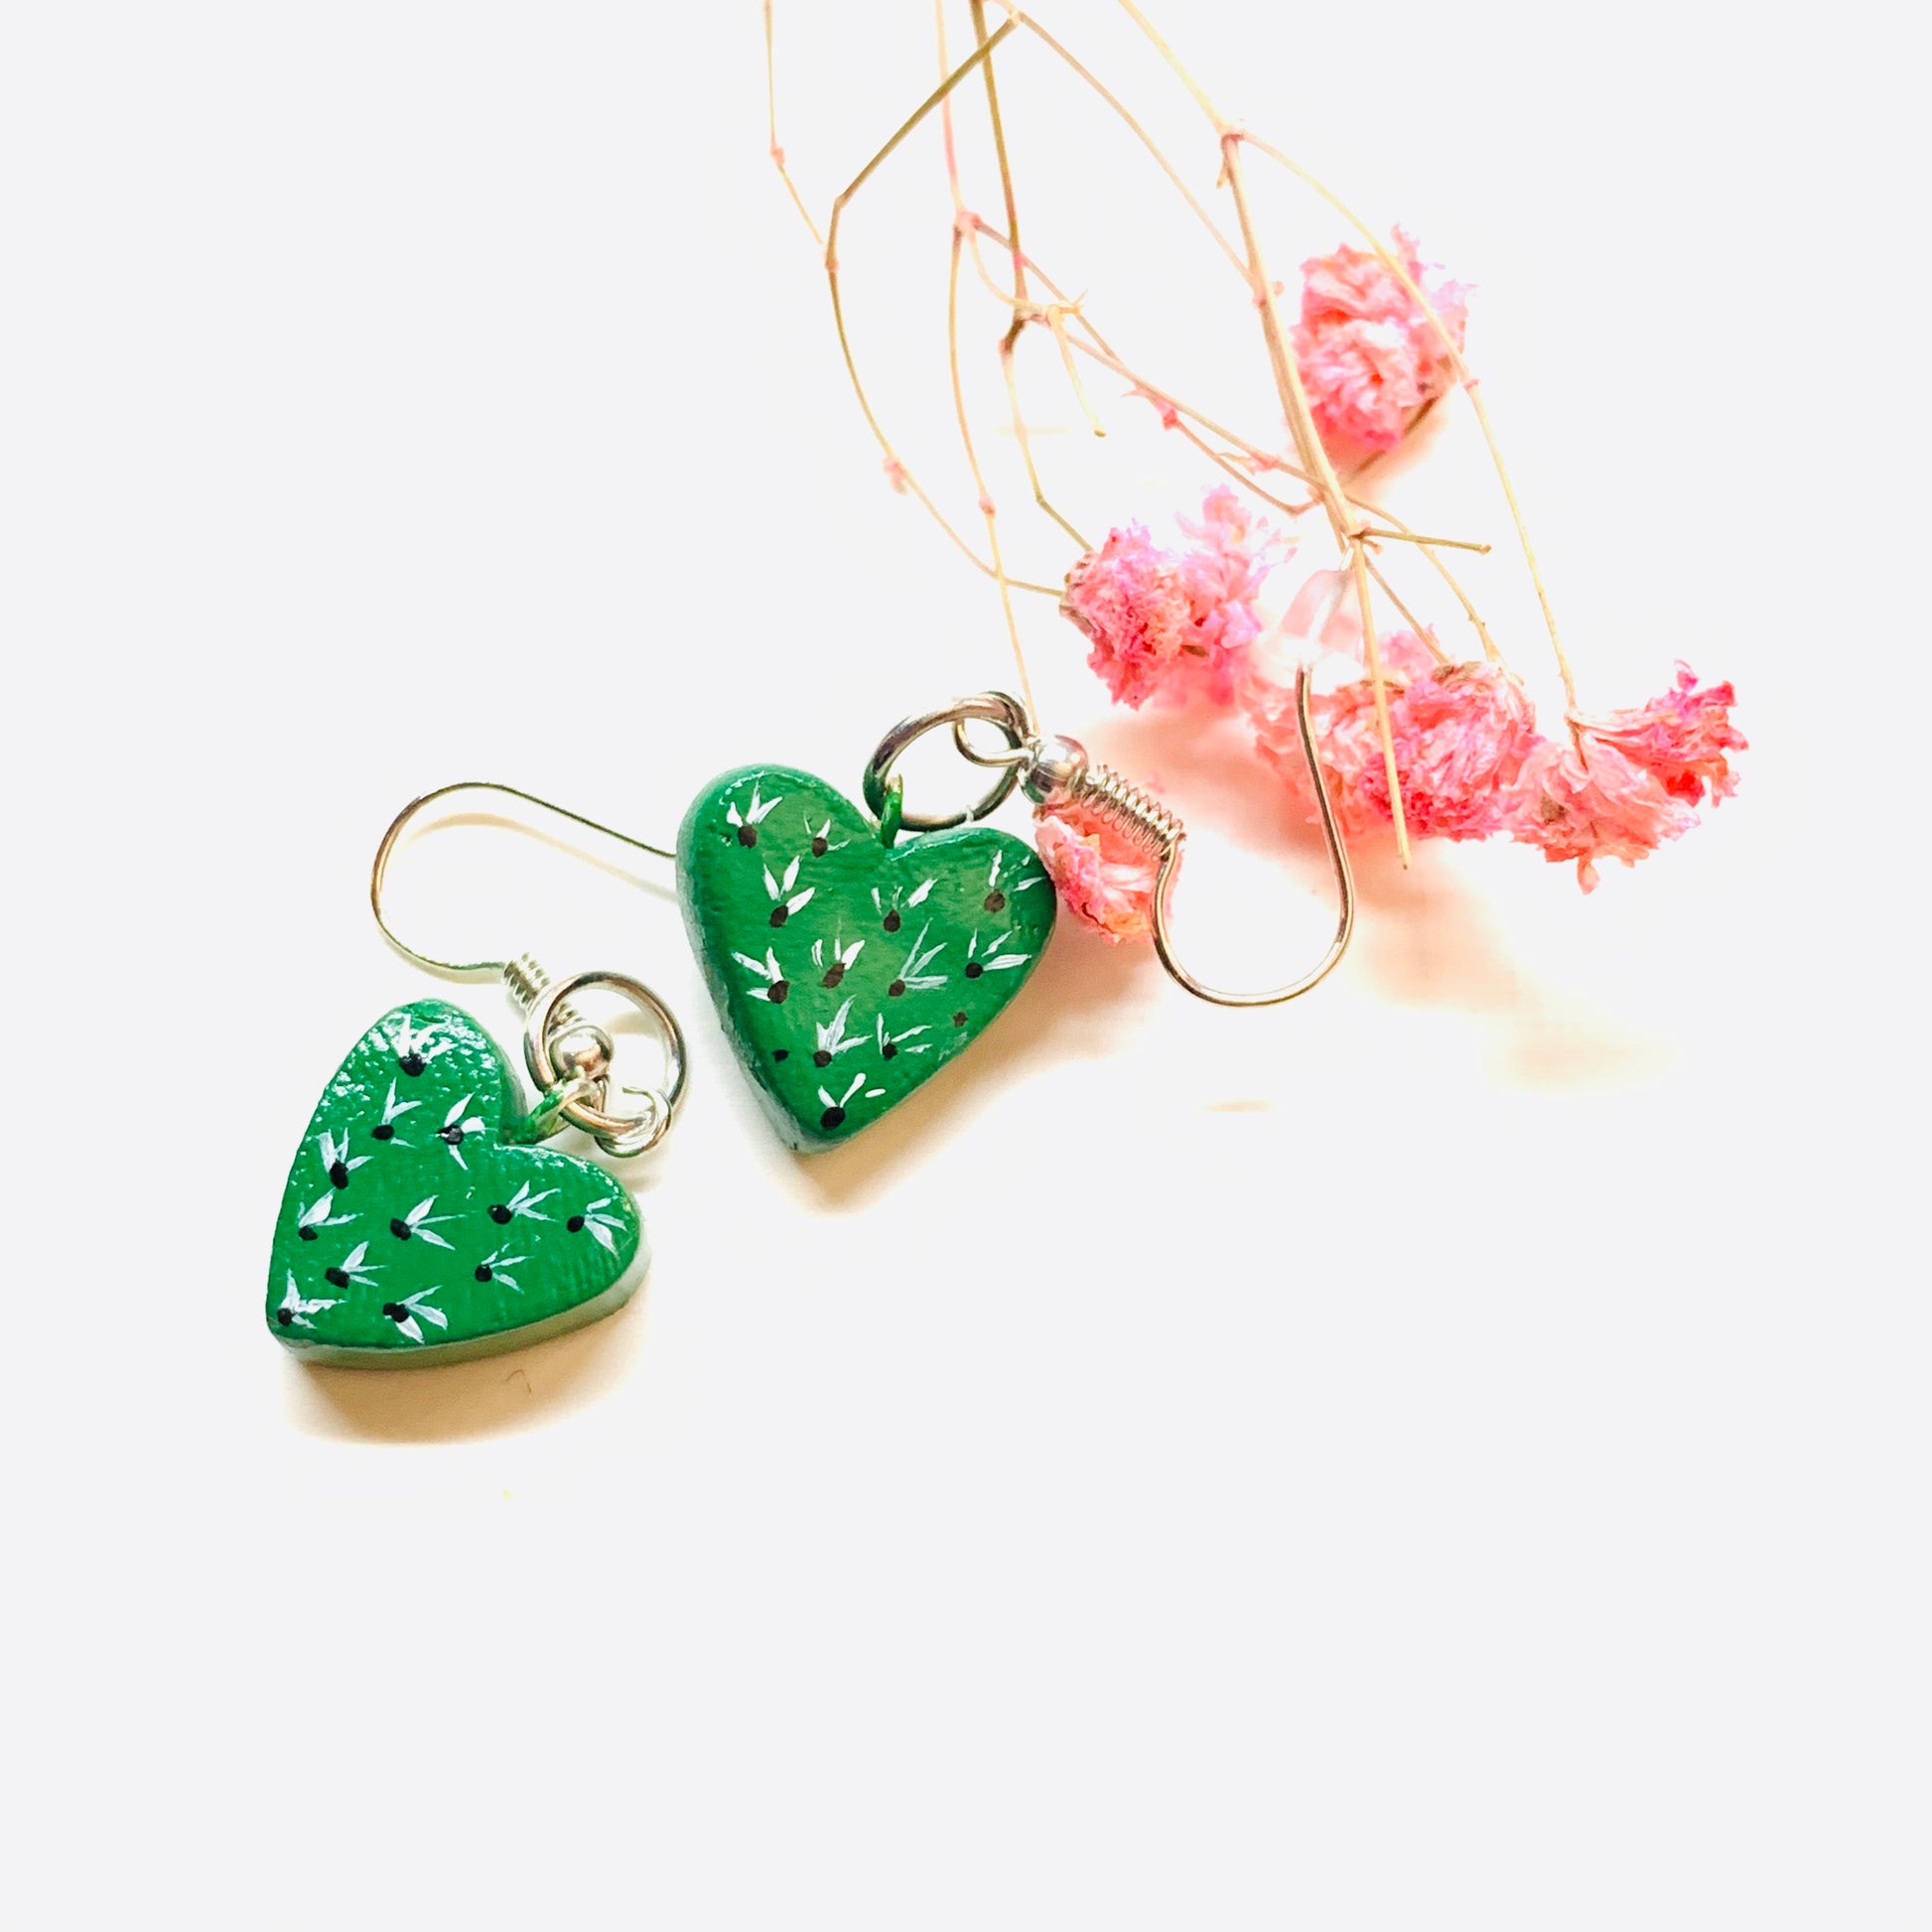 Heart cactus earrings. Mini stud hearty nopal aretes mujer. Drop and dangle pendants. Mexican jewelry made of natural clay. Frida kahlo inspired by Fridamaniacs accessories